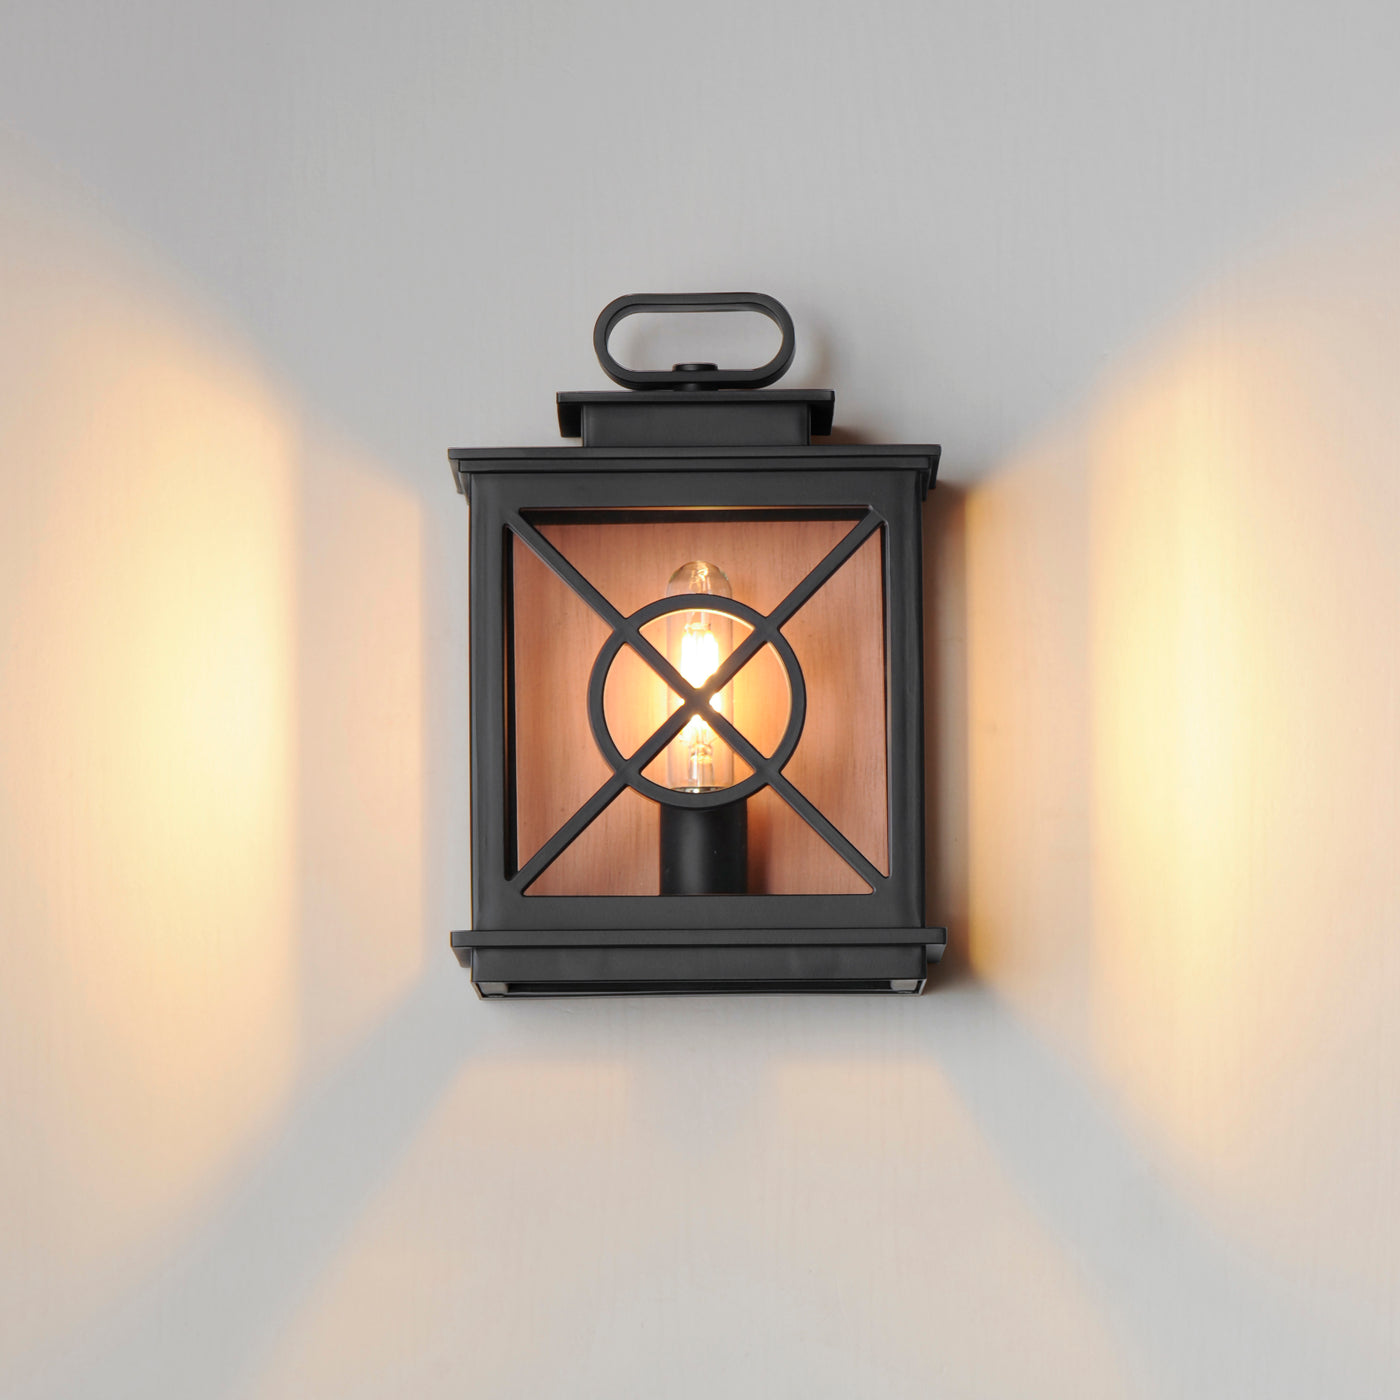 Black American Coach Lantern Style Outdoor Wall Sconce